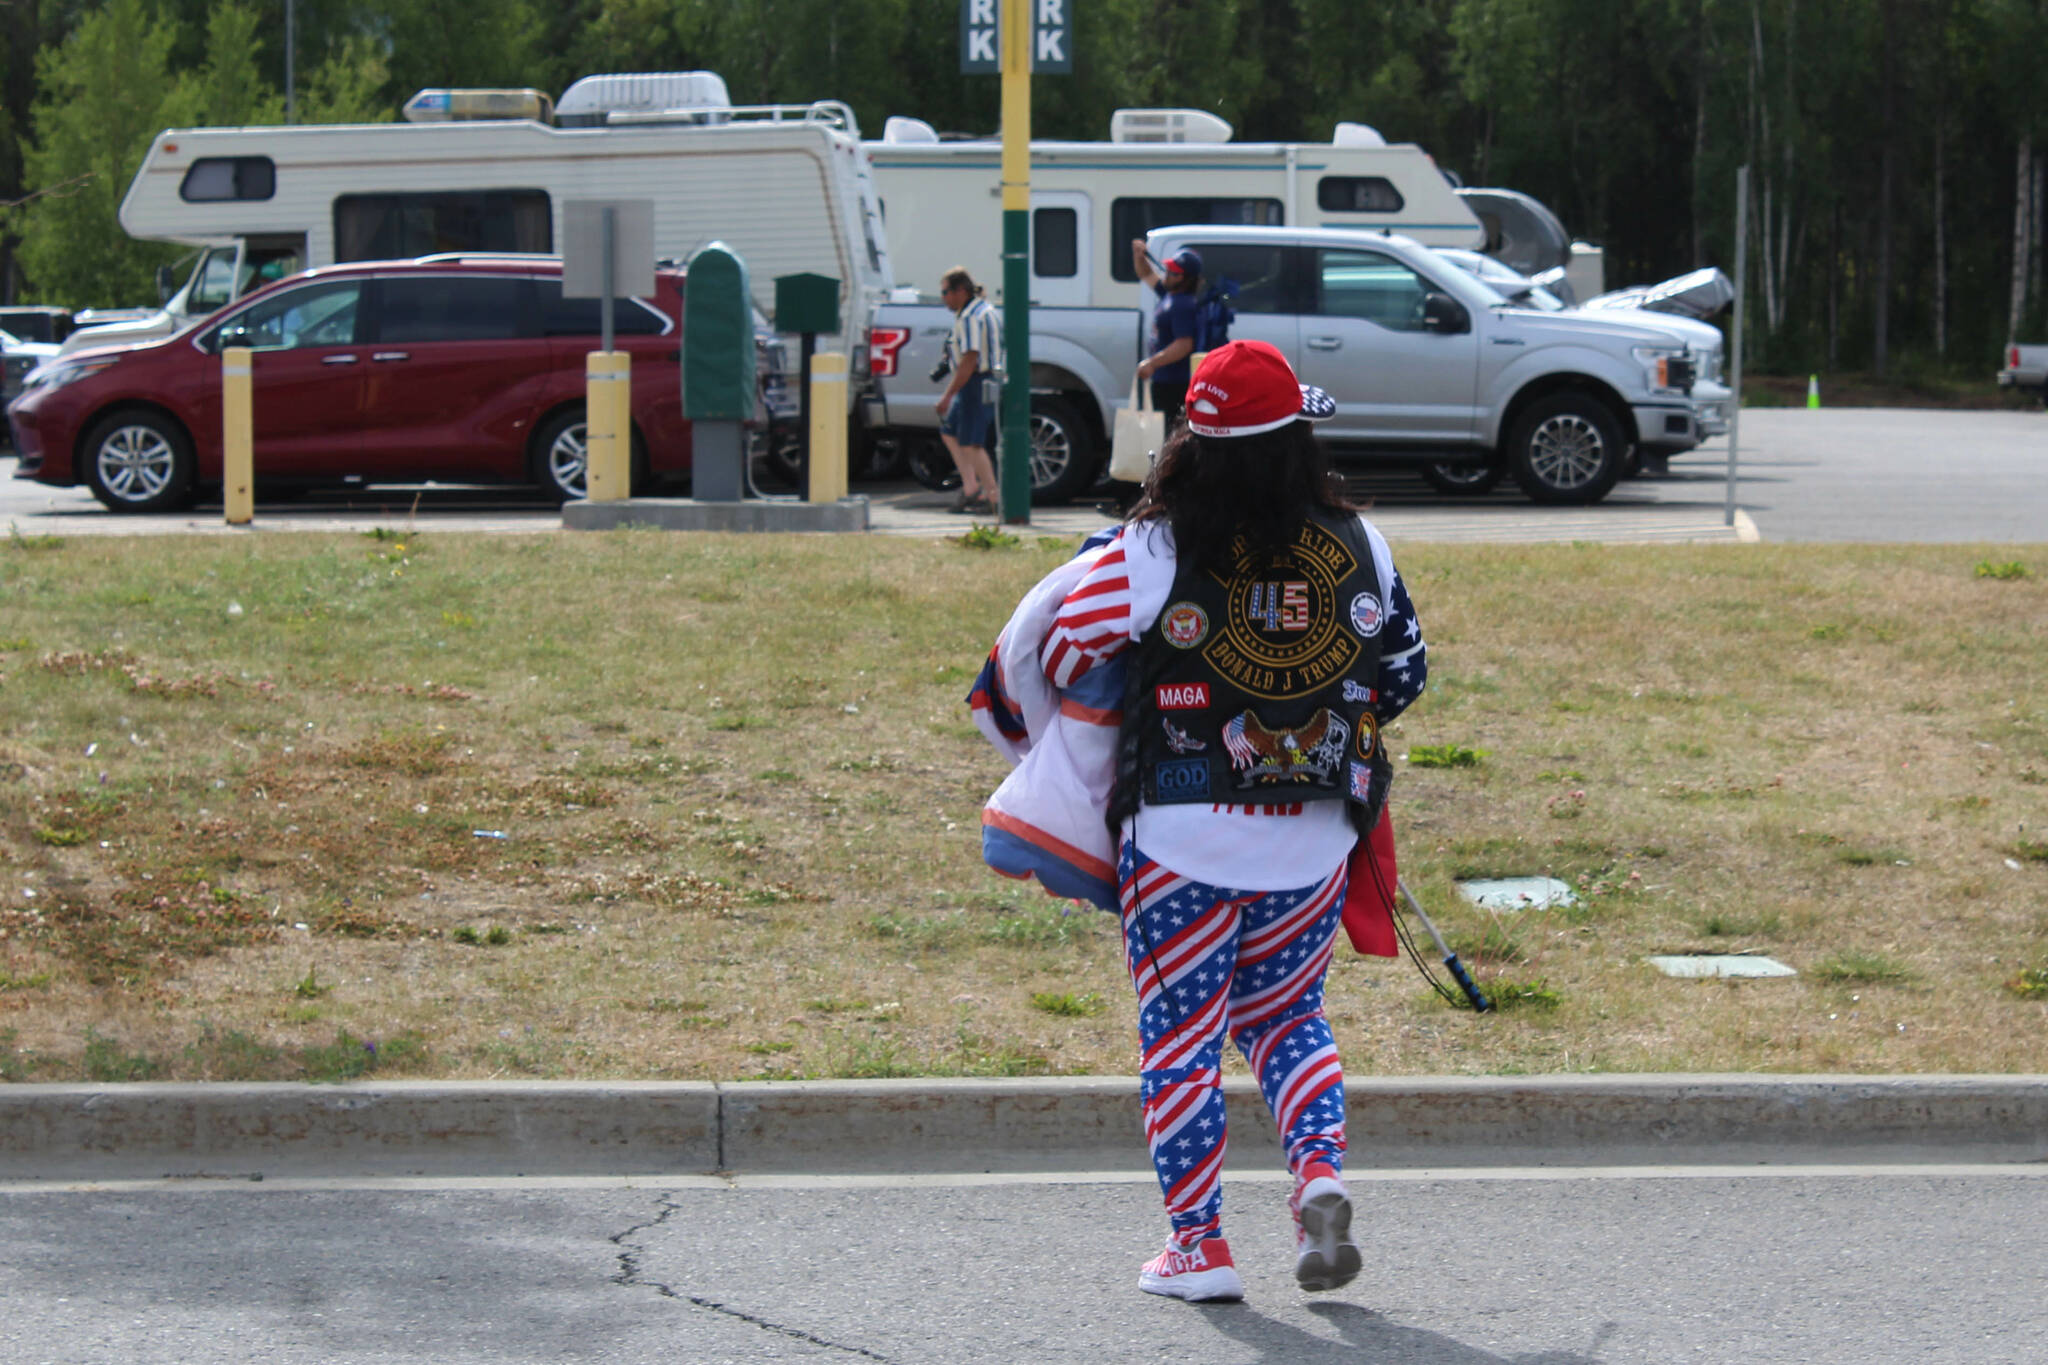 A person wearing Donald Trump and patriotic attire walks around outside of the Alaska Airlines Center, where a Save America rally was being held, on Saturday, July 9, 2022, in Anchorage, Alaska. Former President Donald Trump, U.S. Senate candidate Kelly Tshibaka and U.S. House candidate Sarah Palin were among the event’s speakers. (Ashlyn O’Hara/Peninsula Clarion)